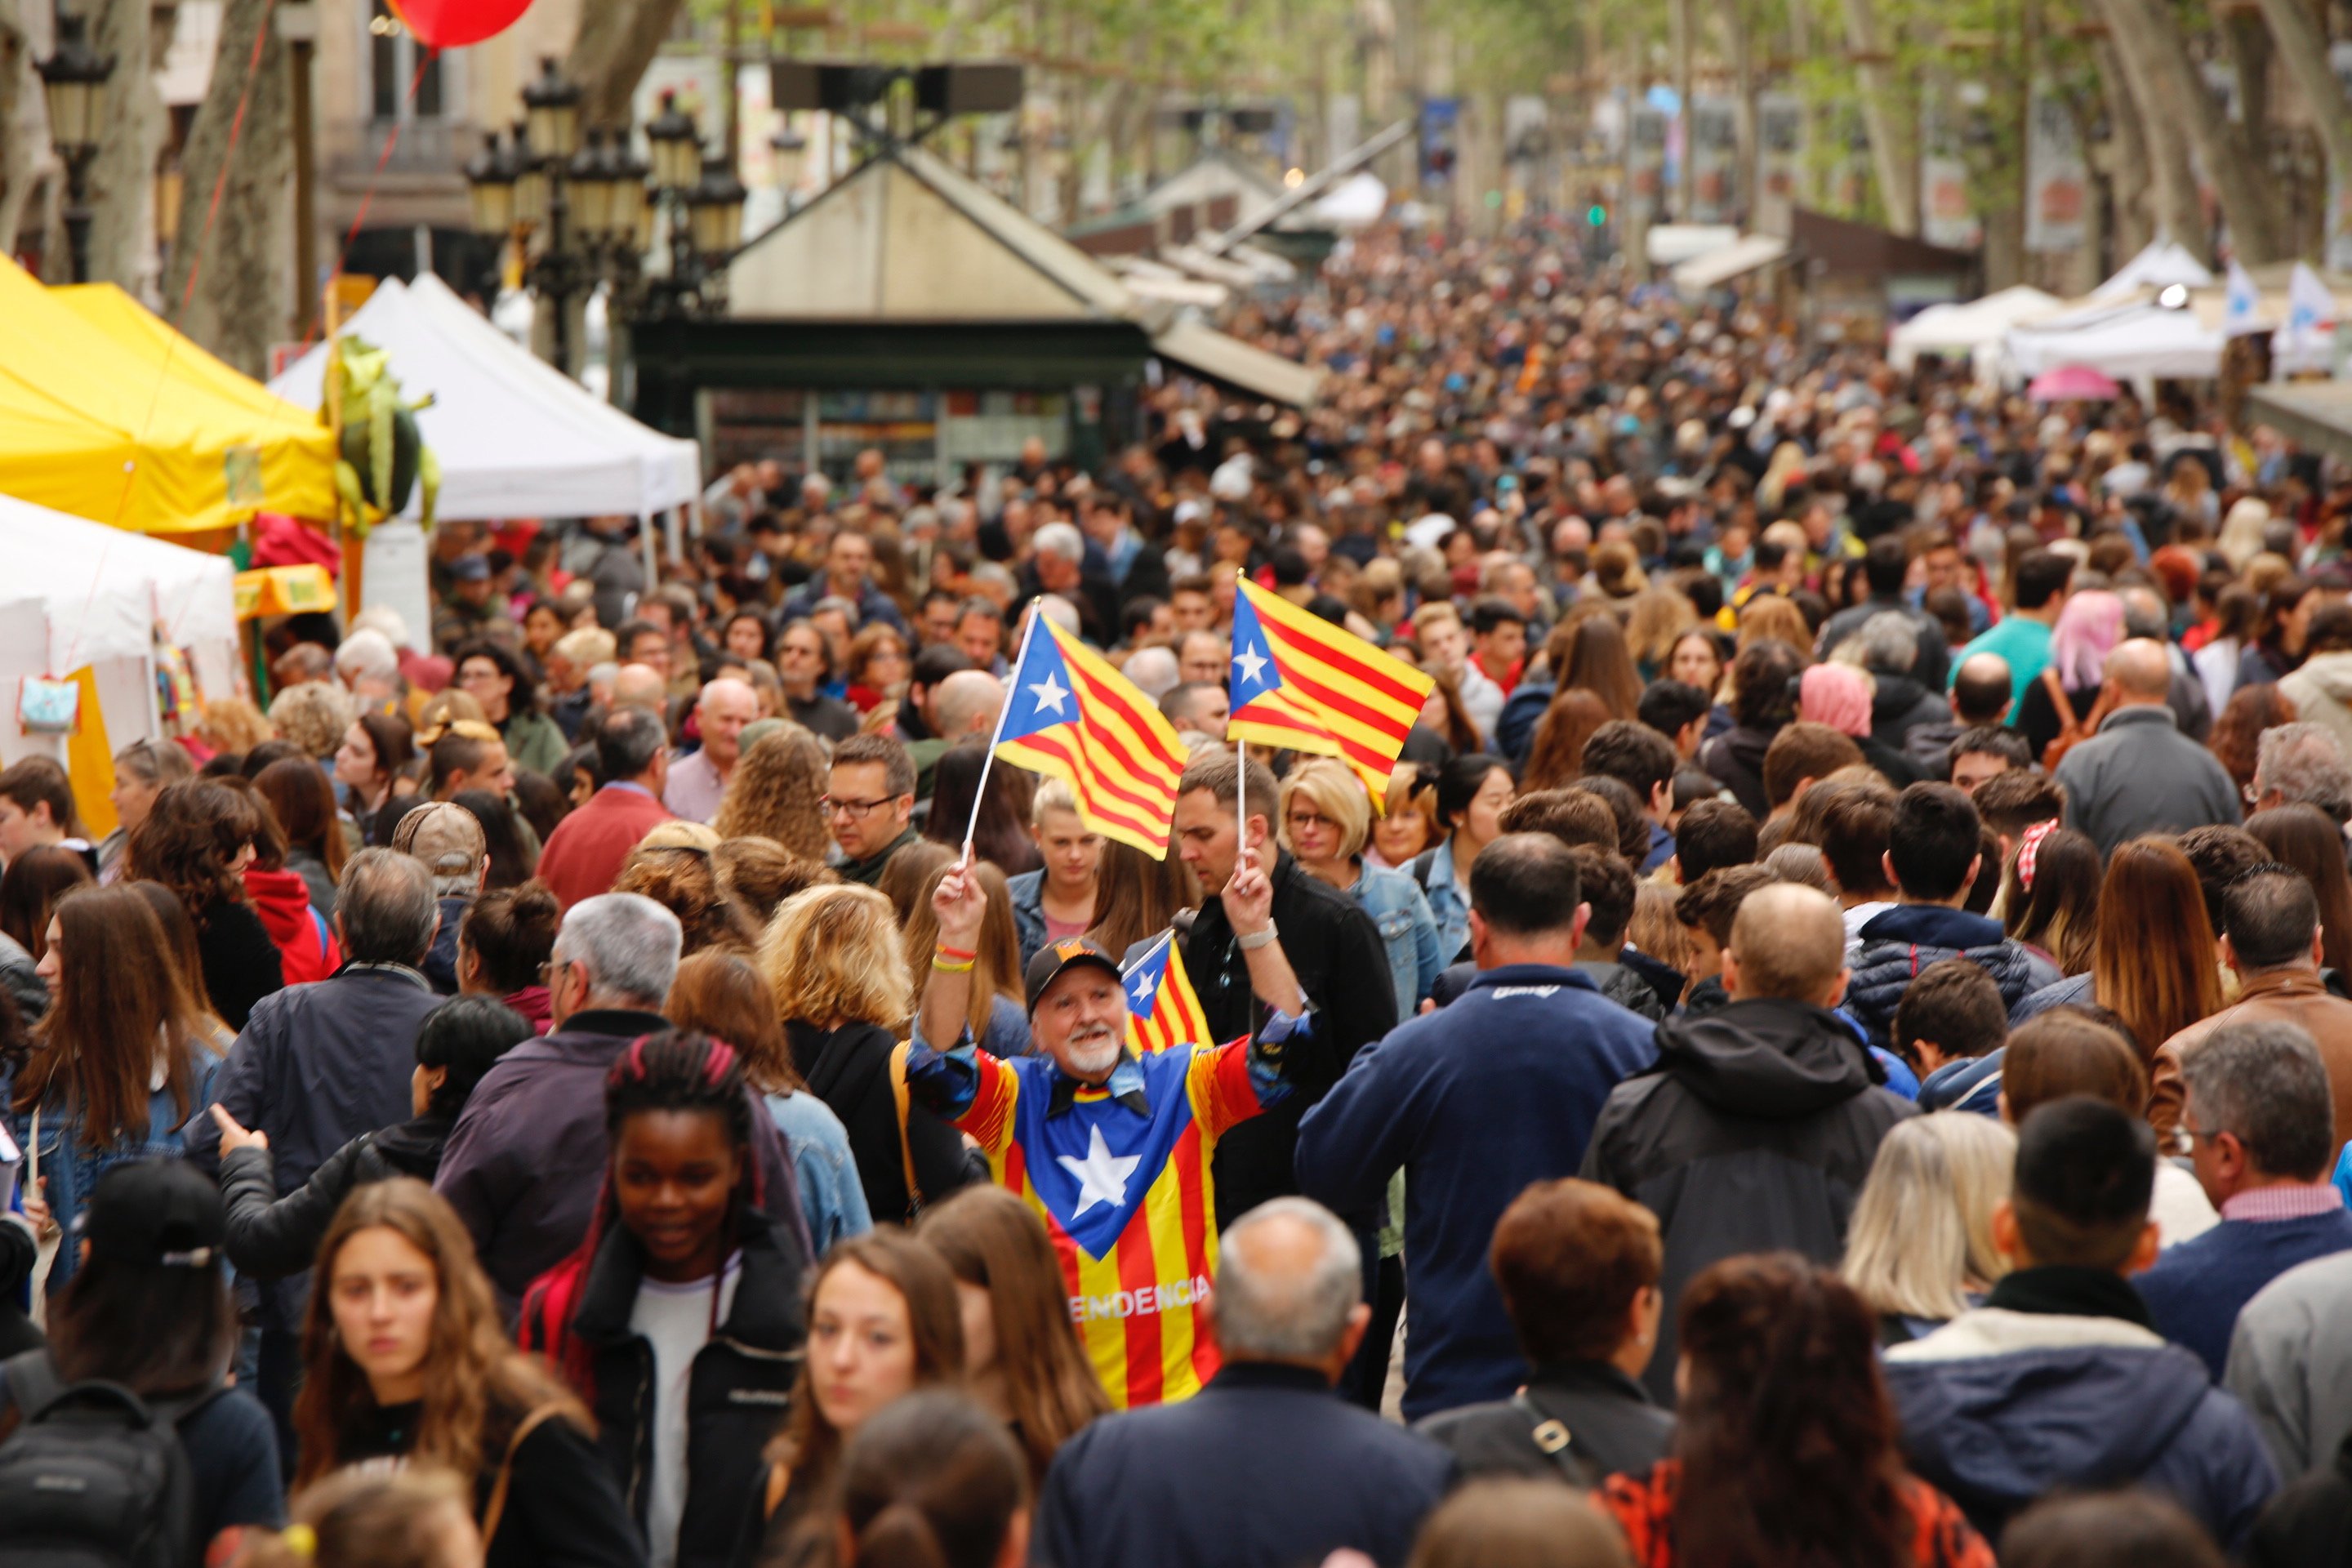 Largest group (45%) of Catalans demand dialogue without constitutional limits